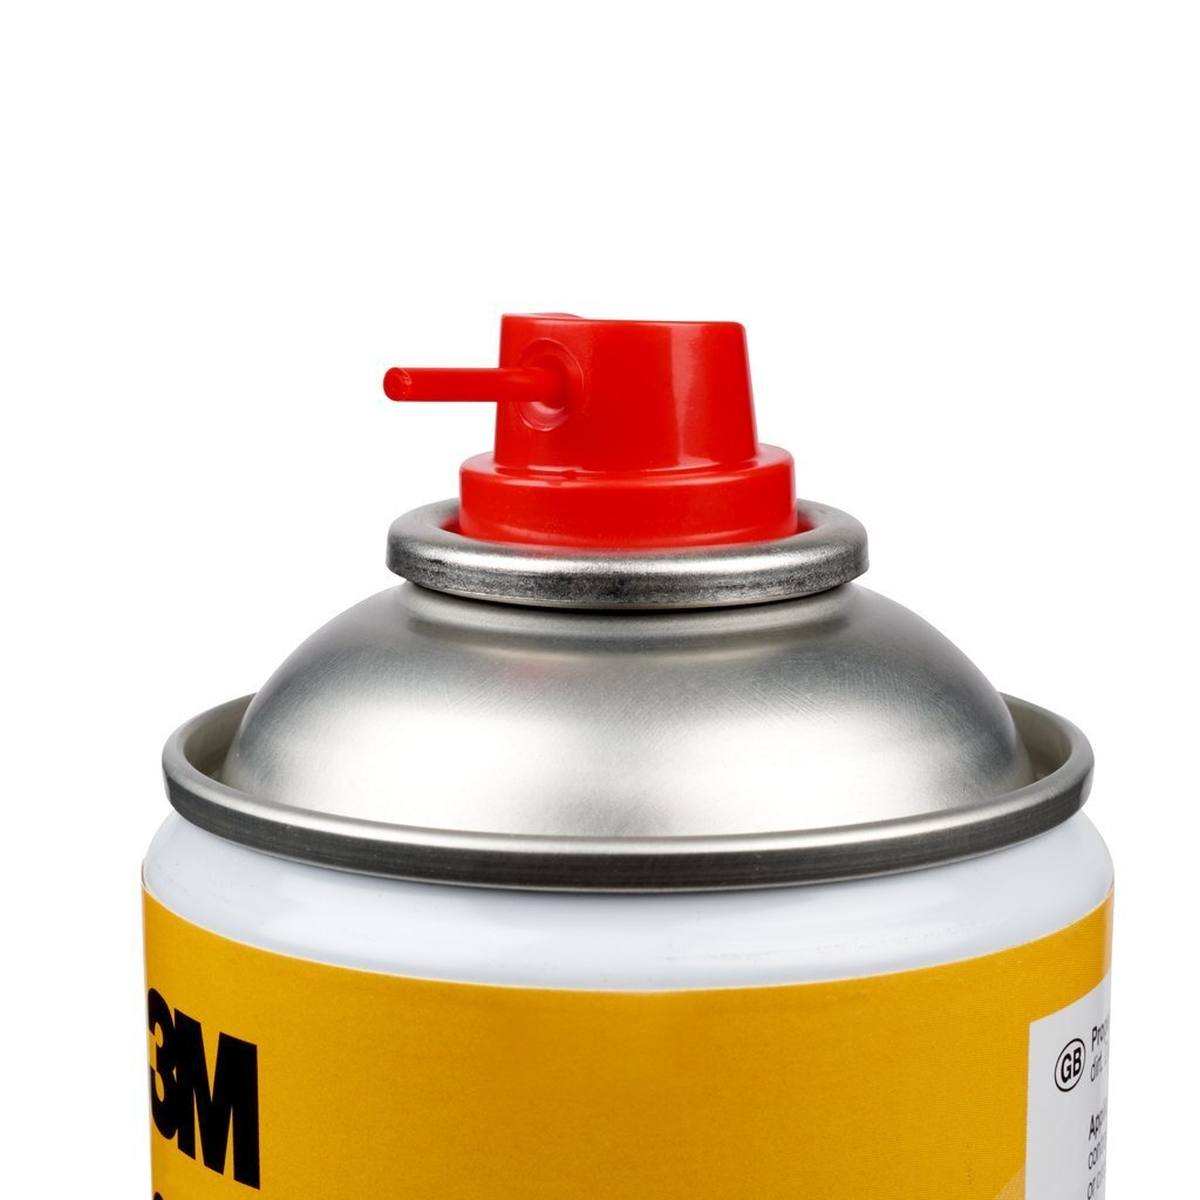 3M Scotch 1625 Special contact cleaning spray, 400 ml